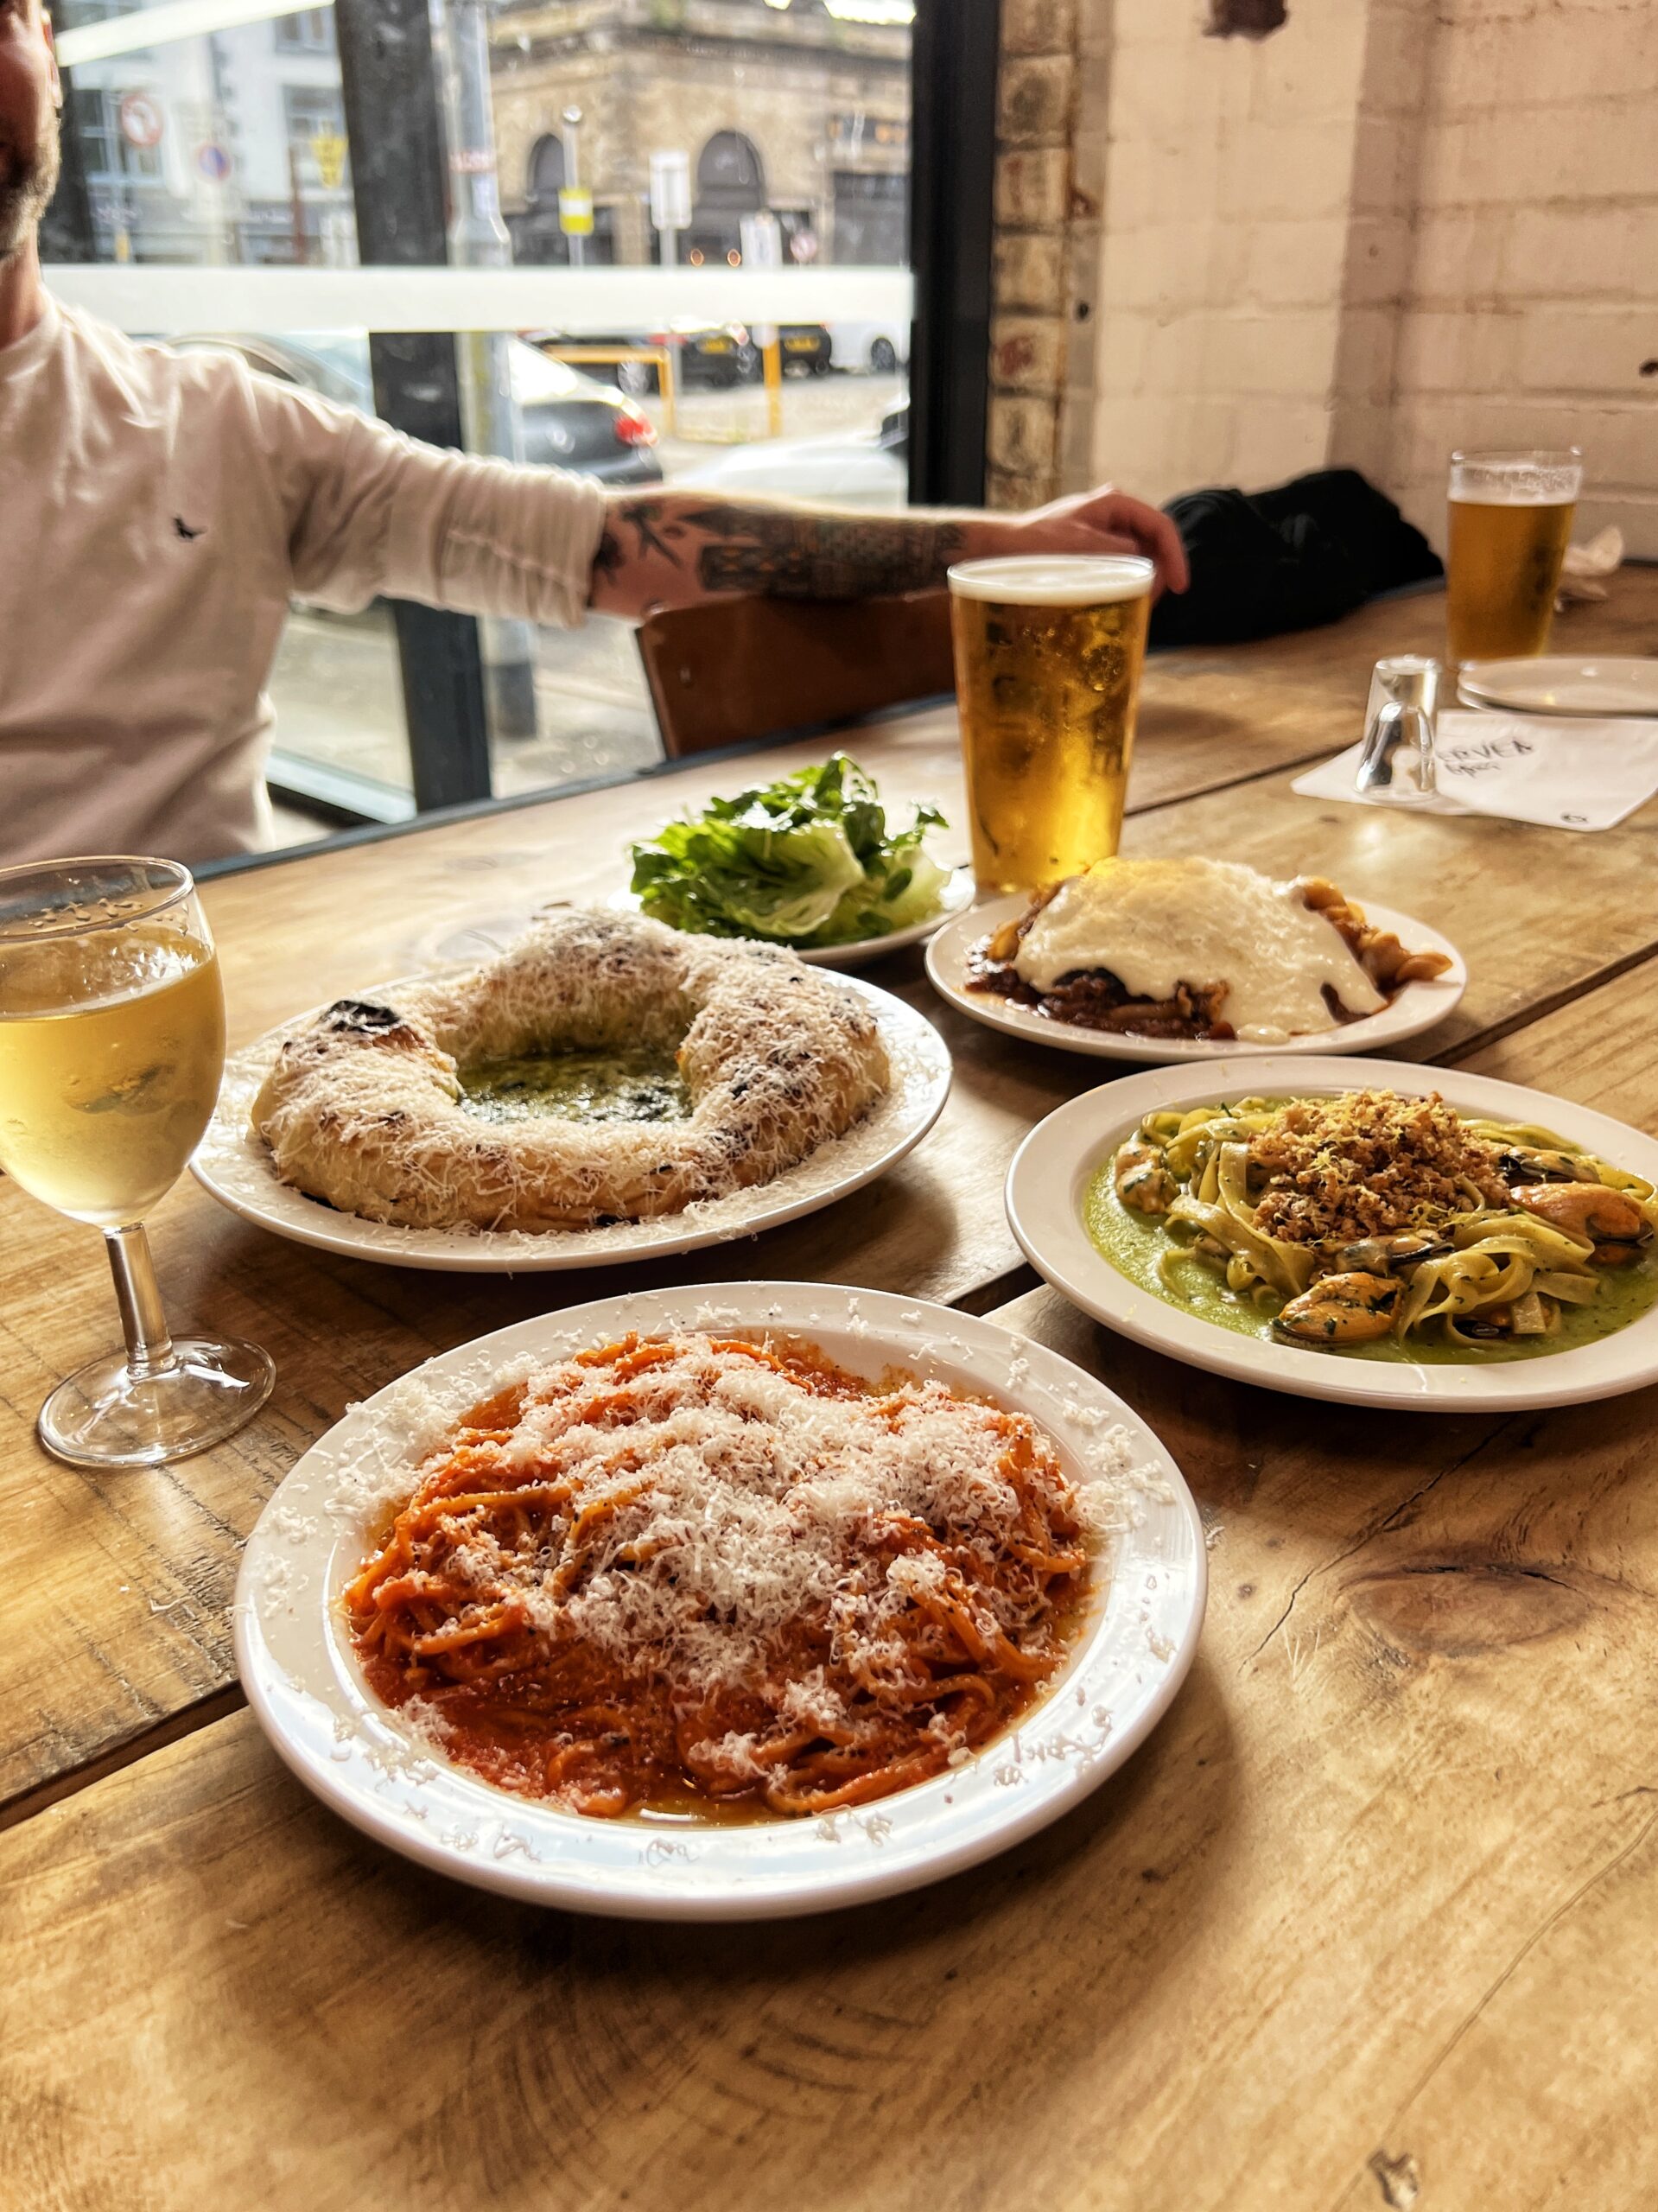 Onda has moved out of The New Cross and revealed plans for a new pasta restaurant in Manchester